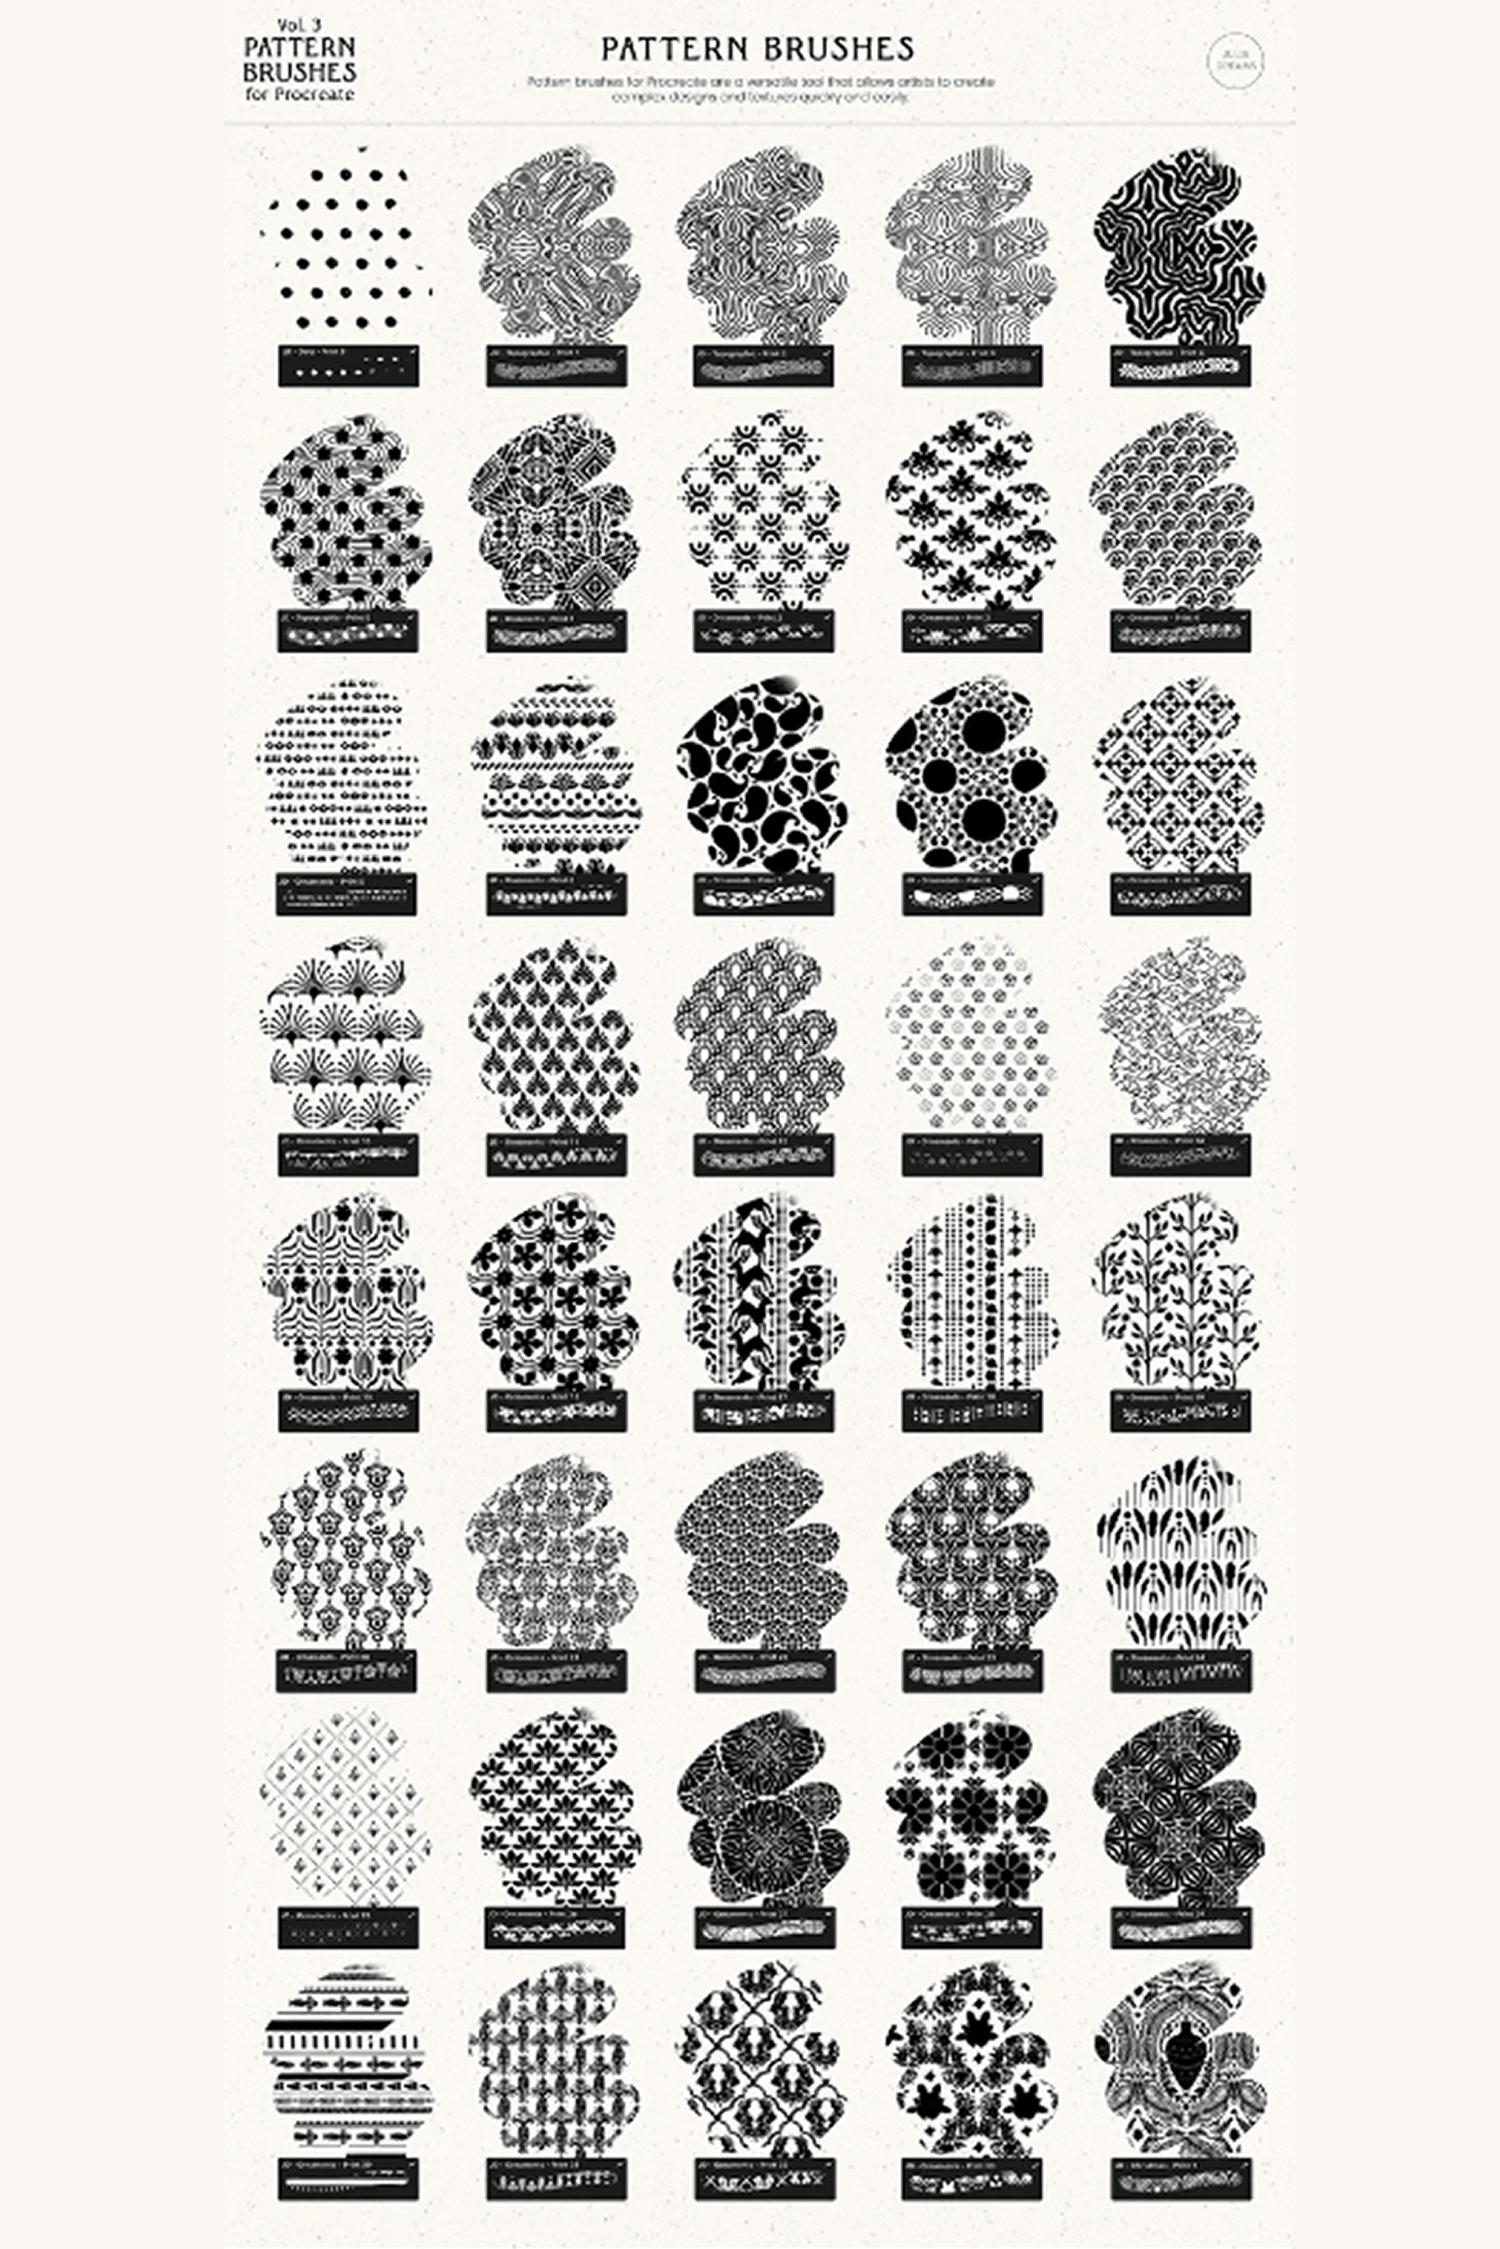 Pattern Brushes Vol 3 by Julia Dreams